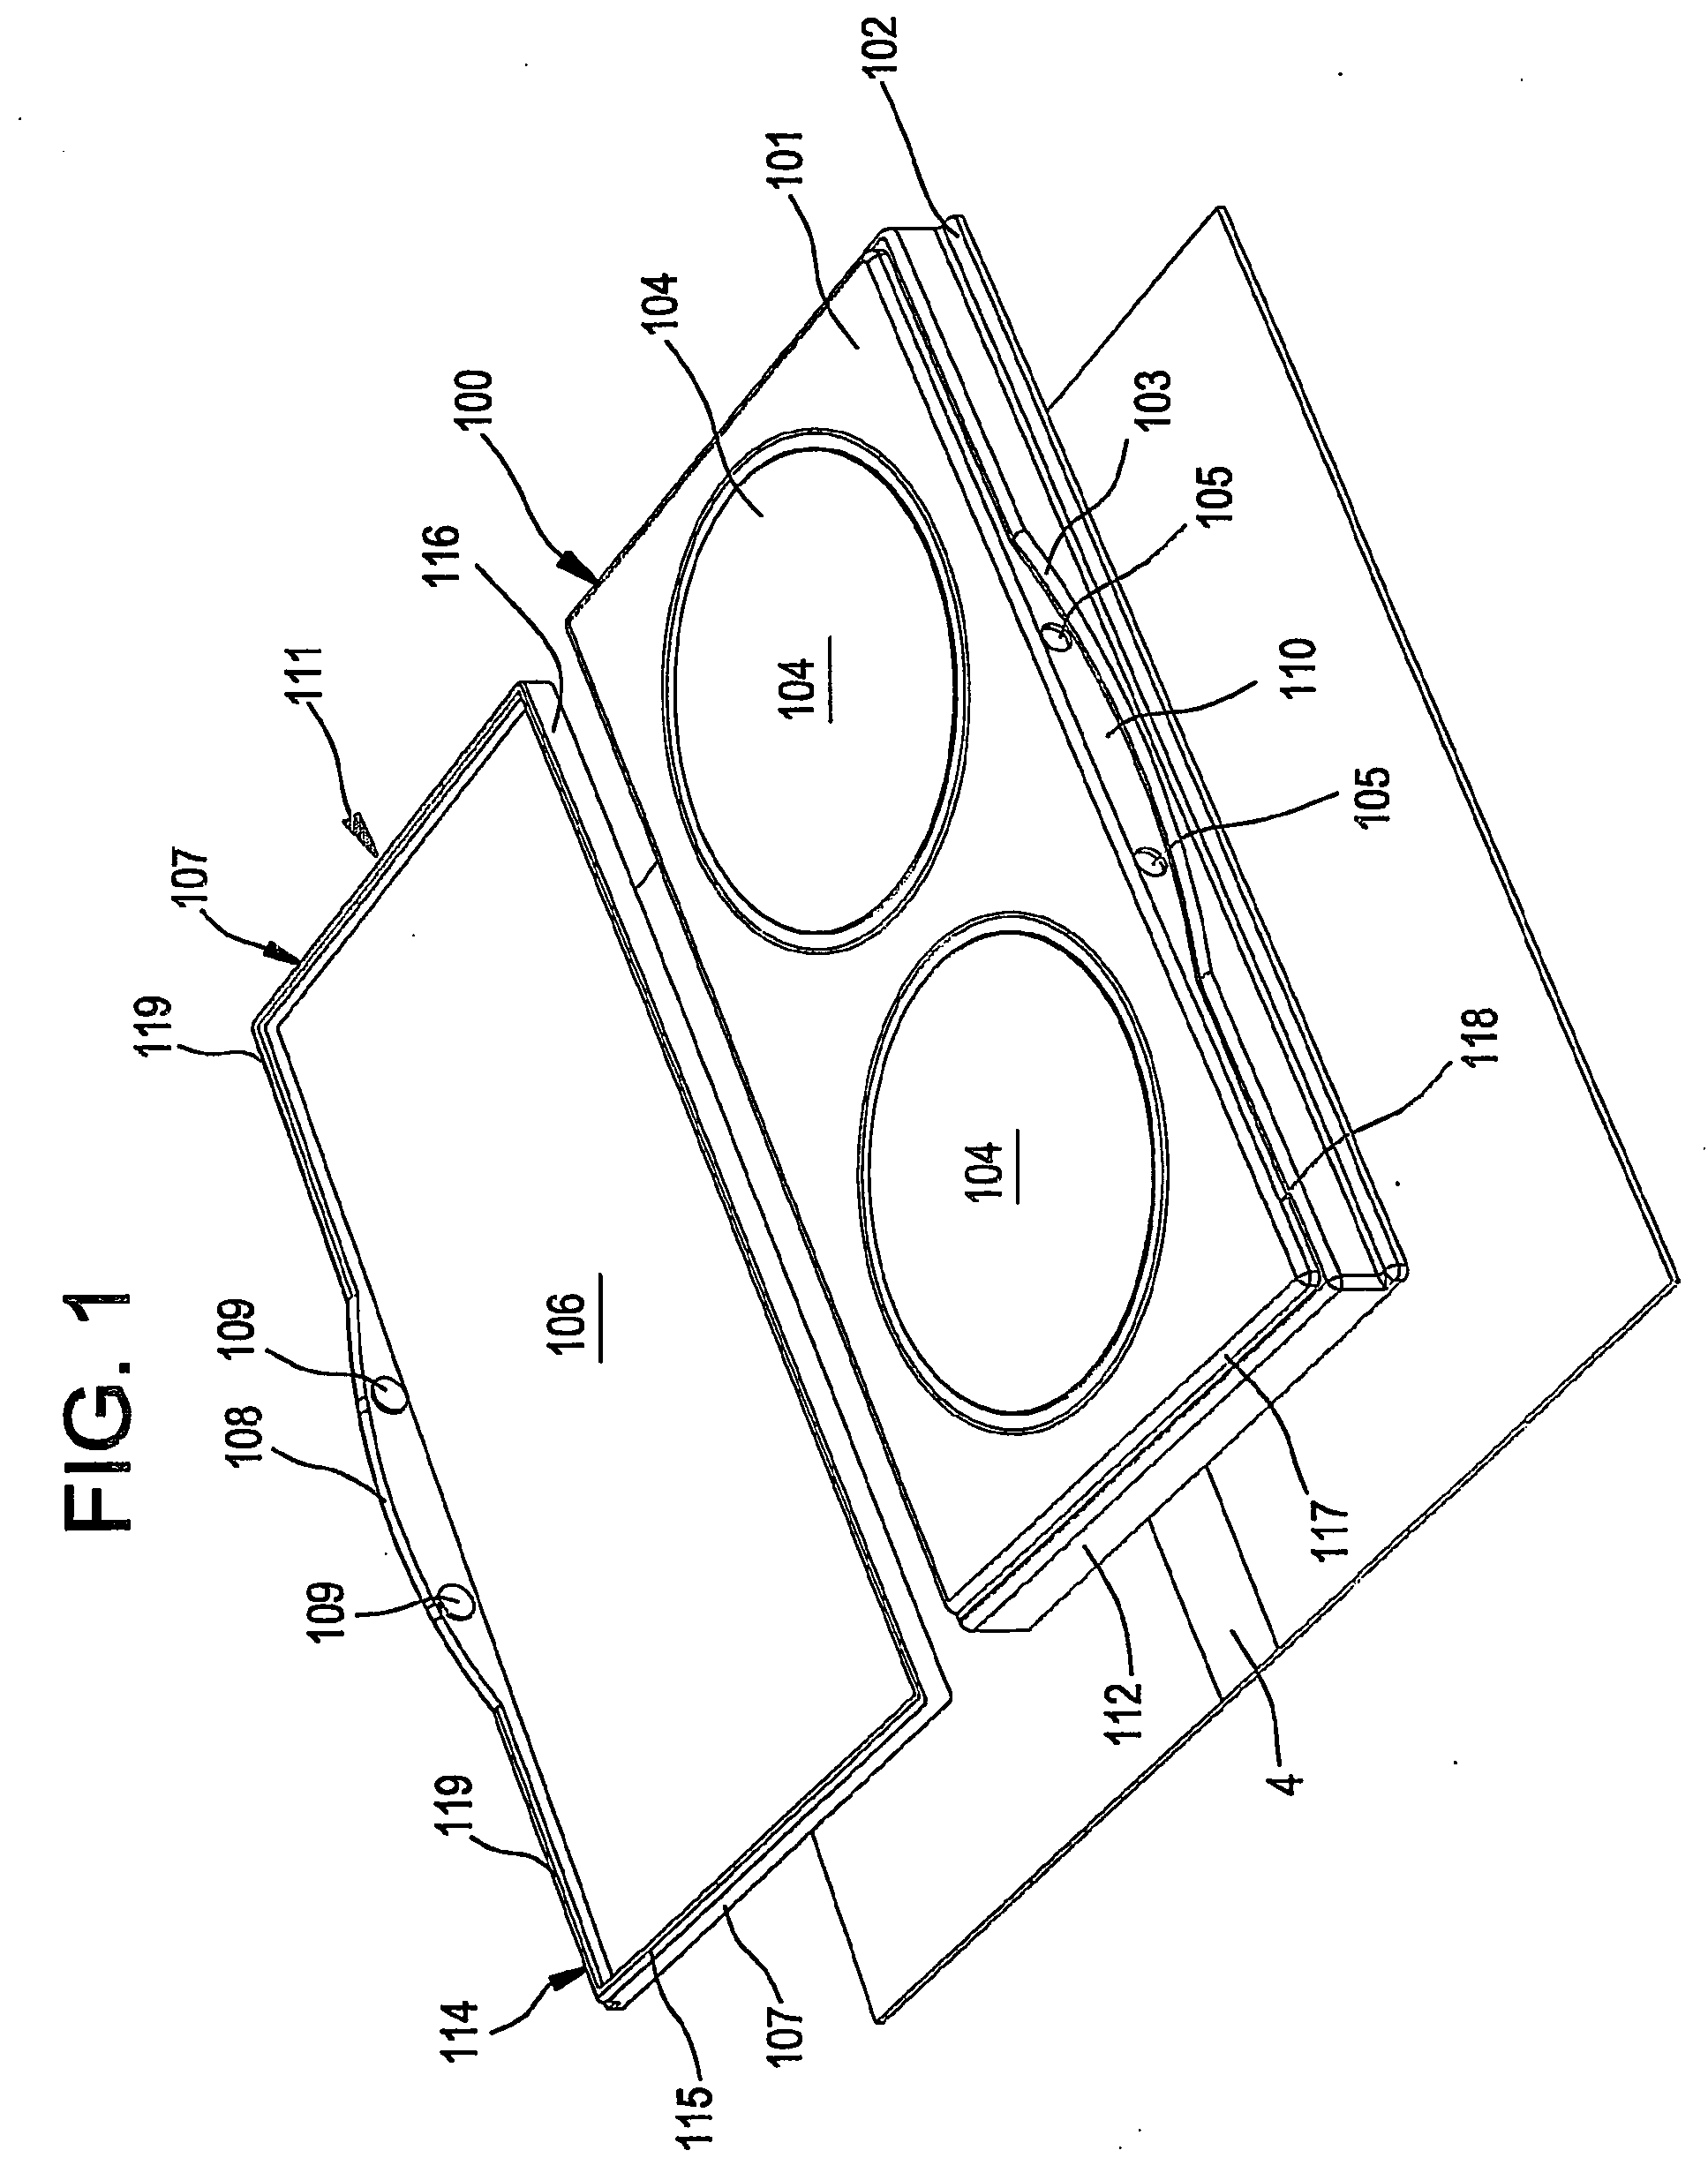 Multi-functional compact with storage receptacles